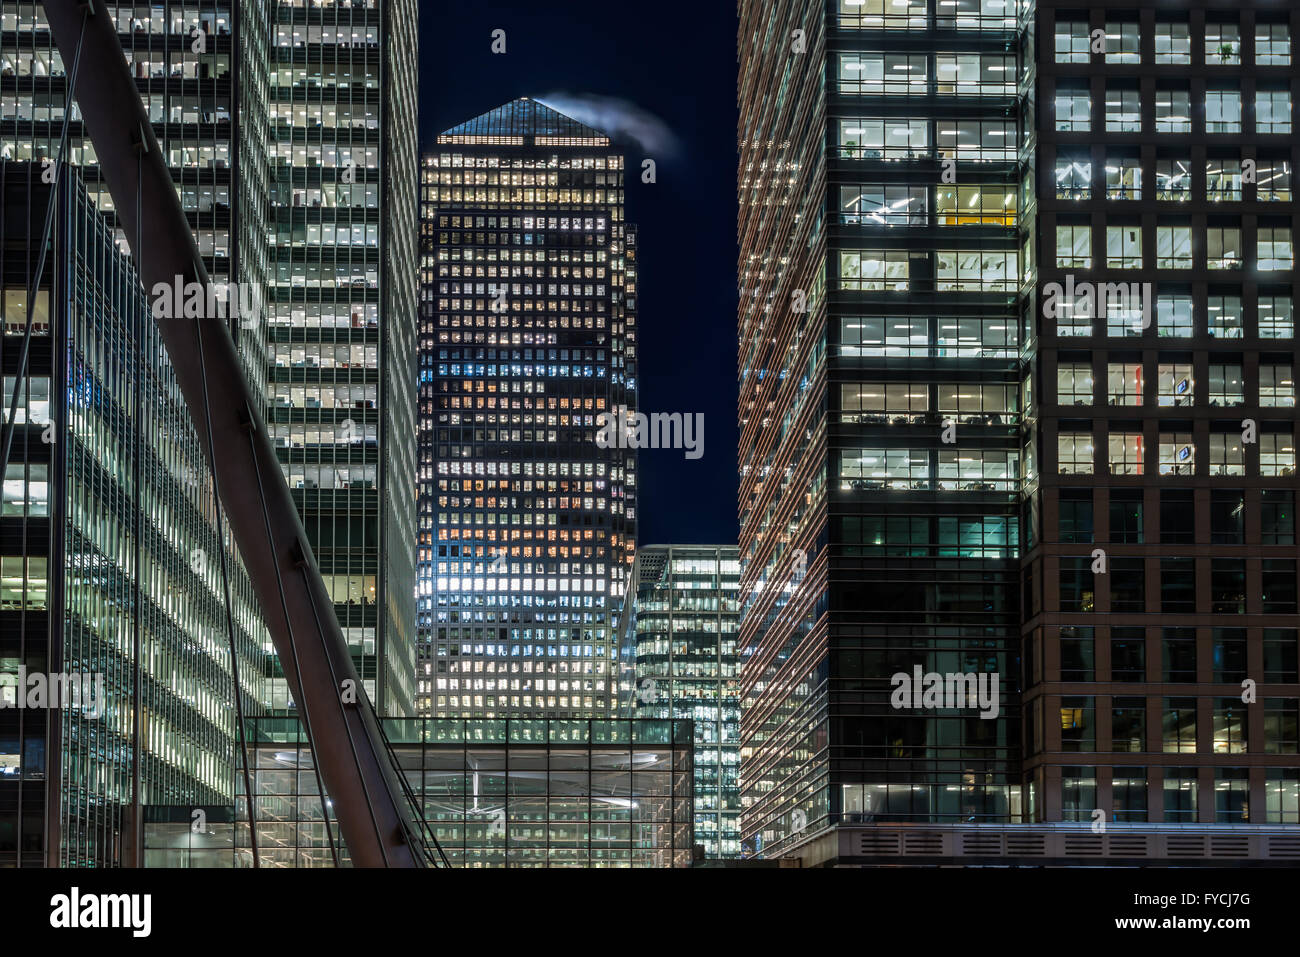 Canary Wharf at night, offices in Canary Wharf, London Stock Photo